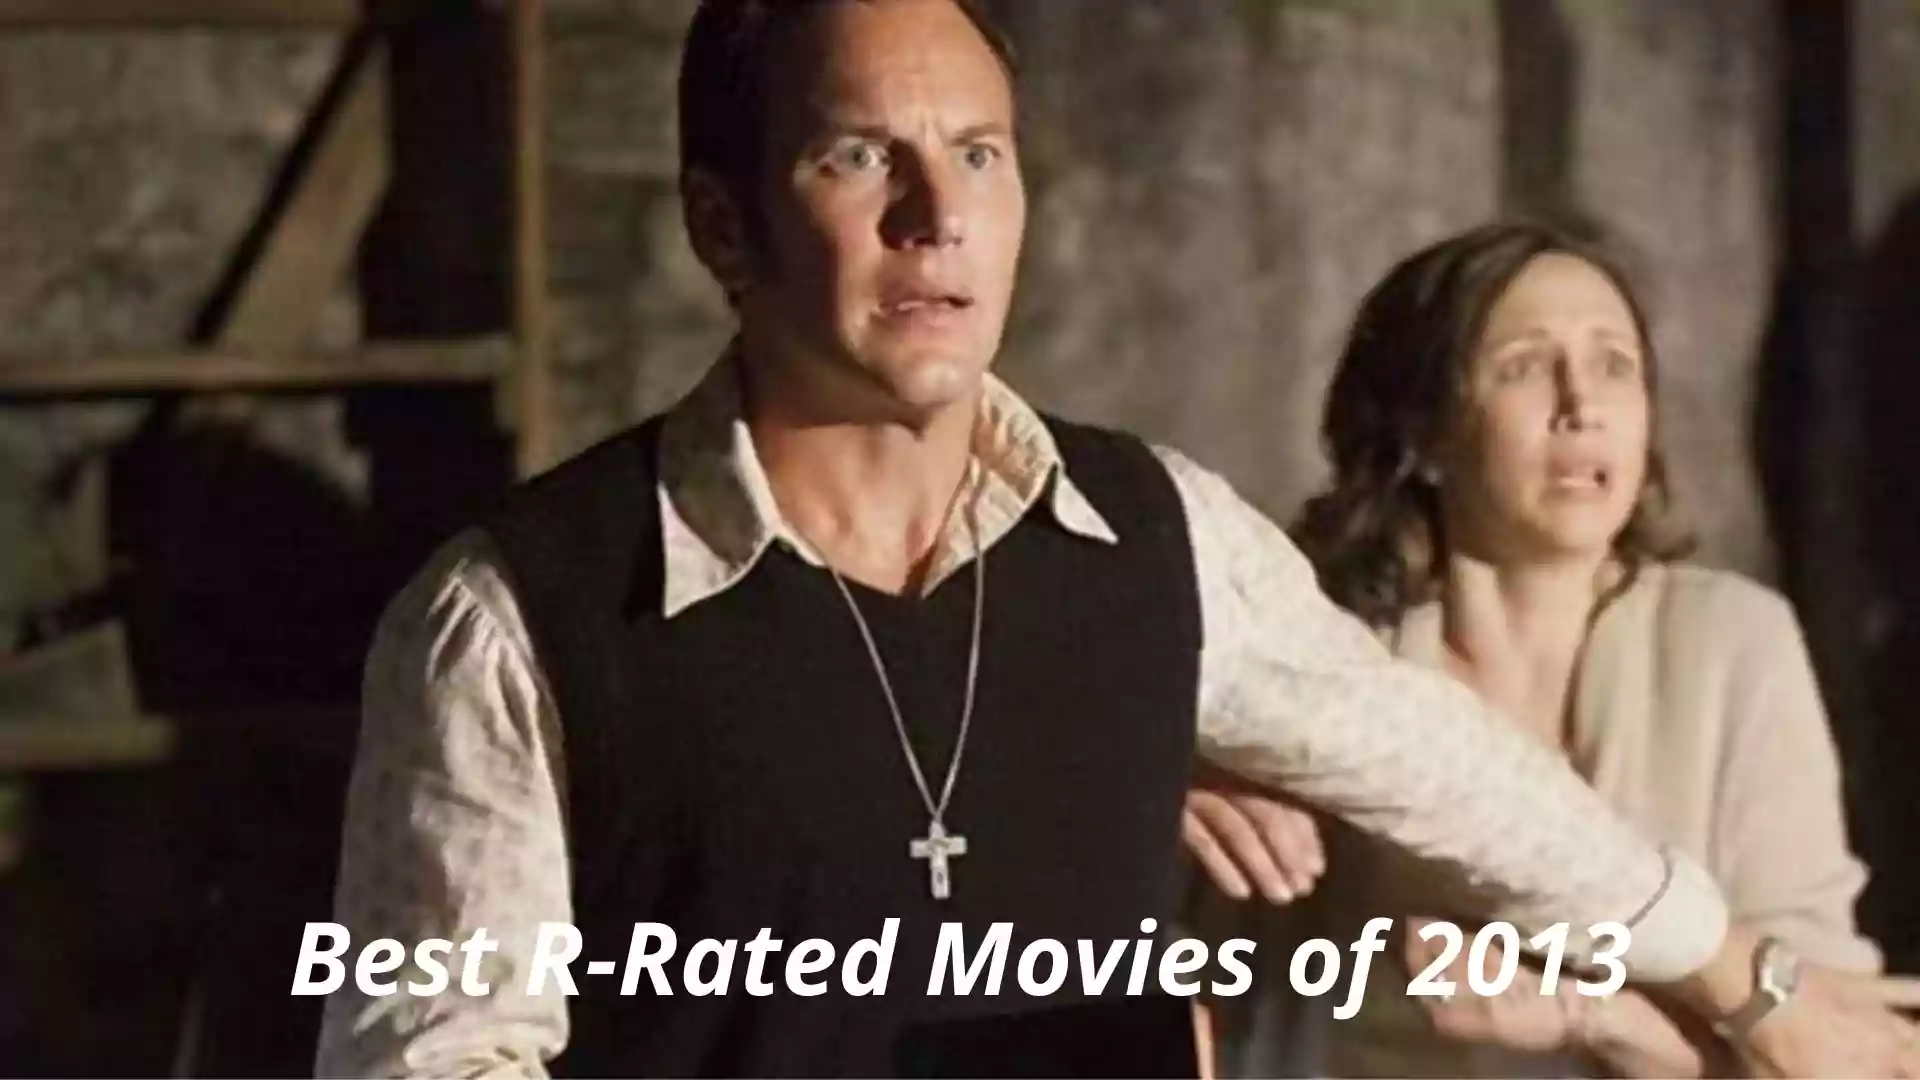 Best R-Rated Movies of 2013